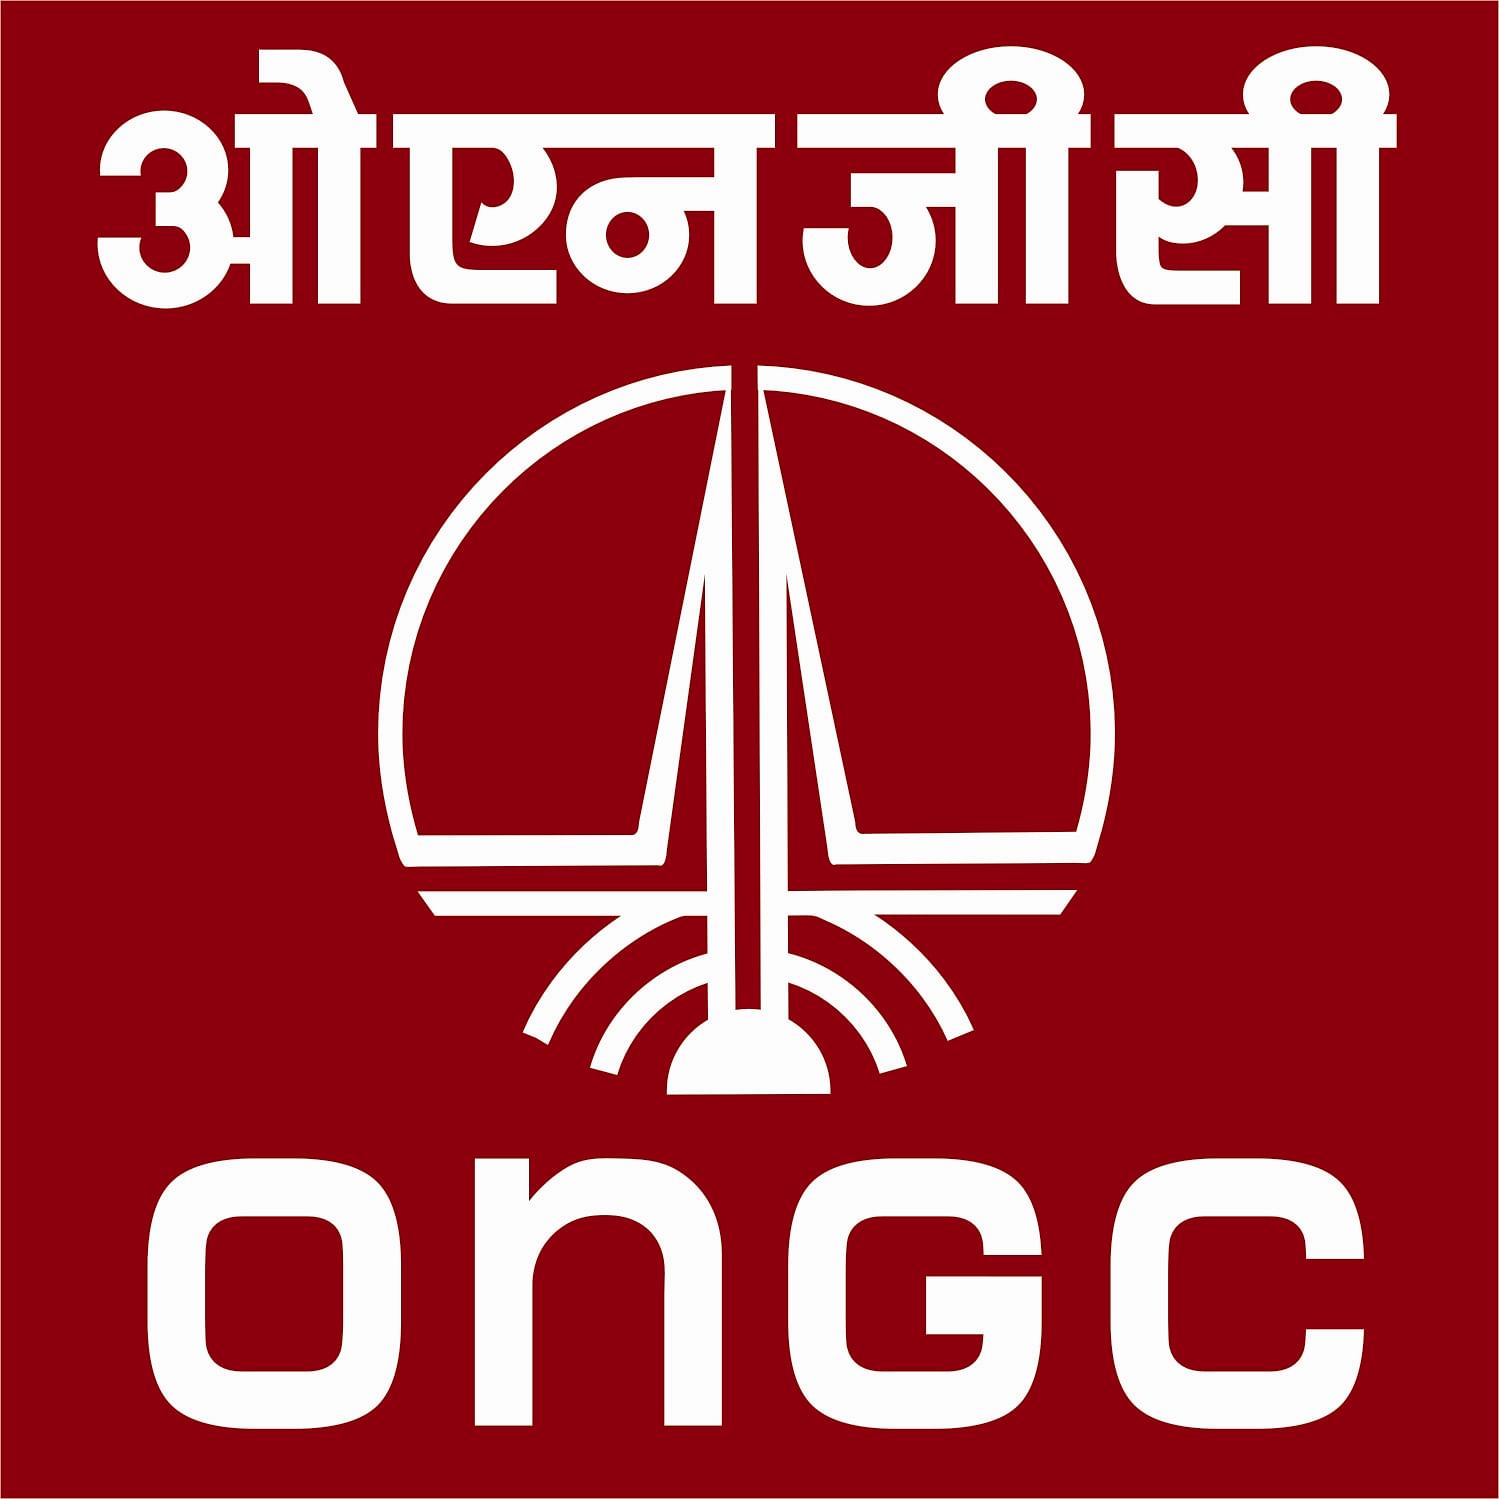 ONGC Apprentice Recruitment 2020: Applications are invited for 4182 Posts, Application Process Begins Today